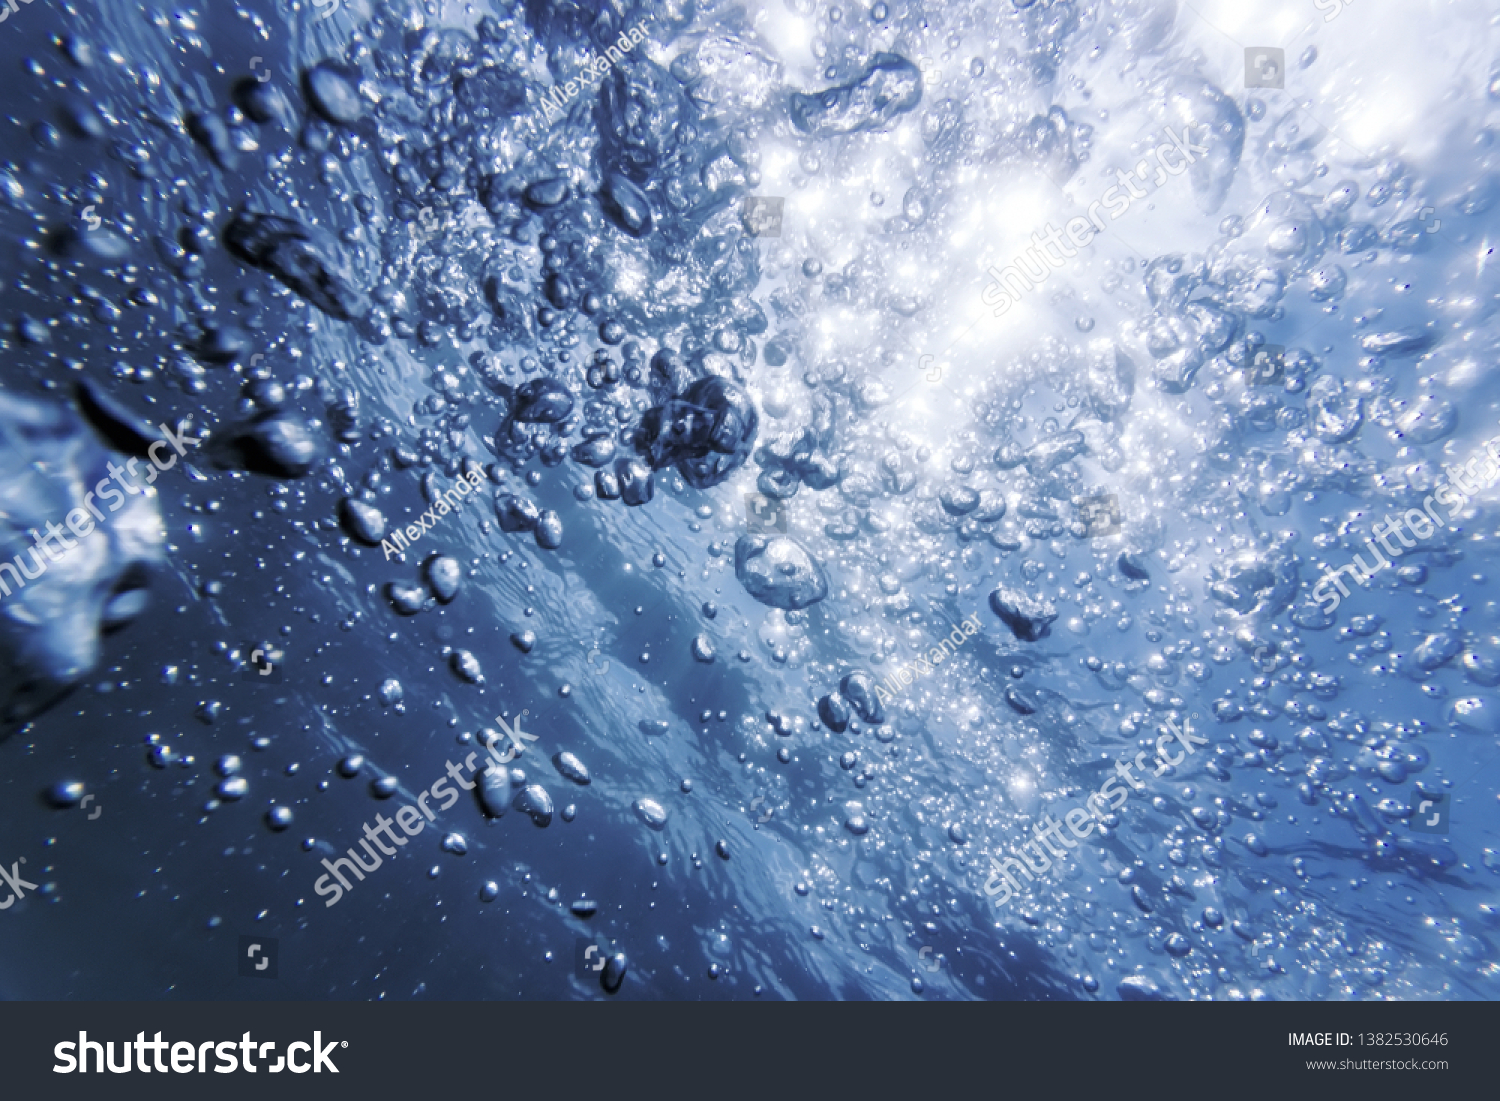 Underwater Bubbles with Sunlight, Underwater Background Bubbles. #1382530646